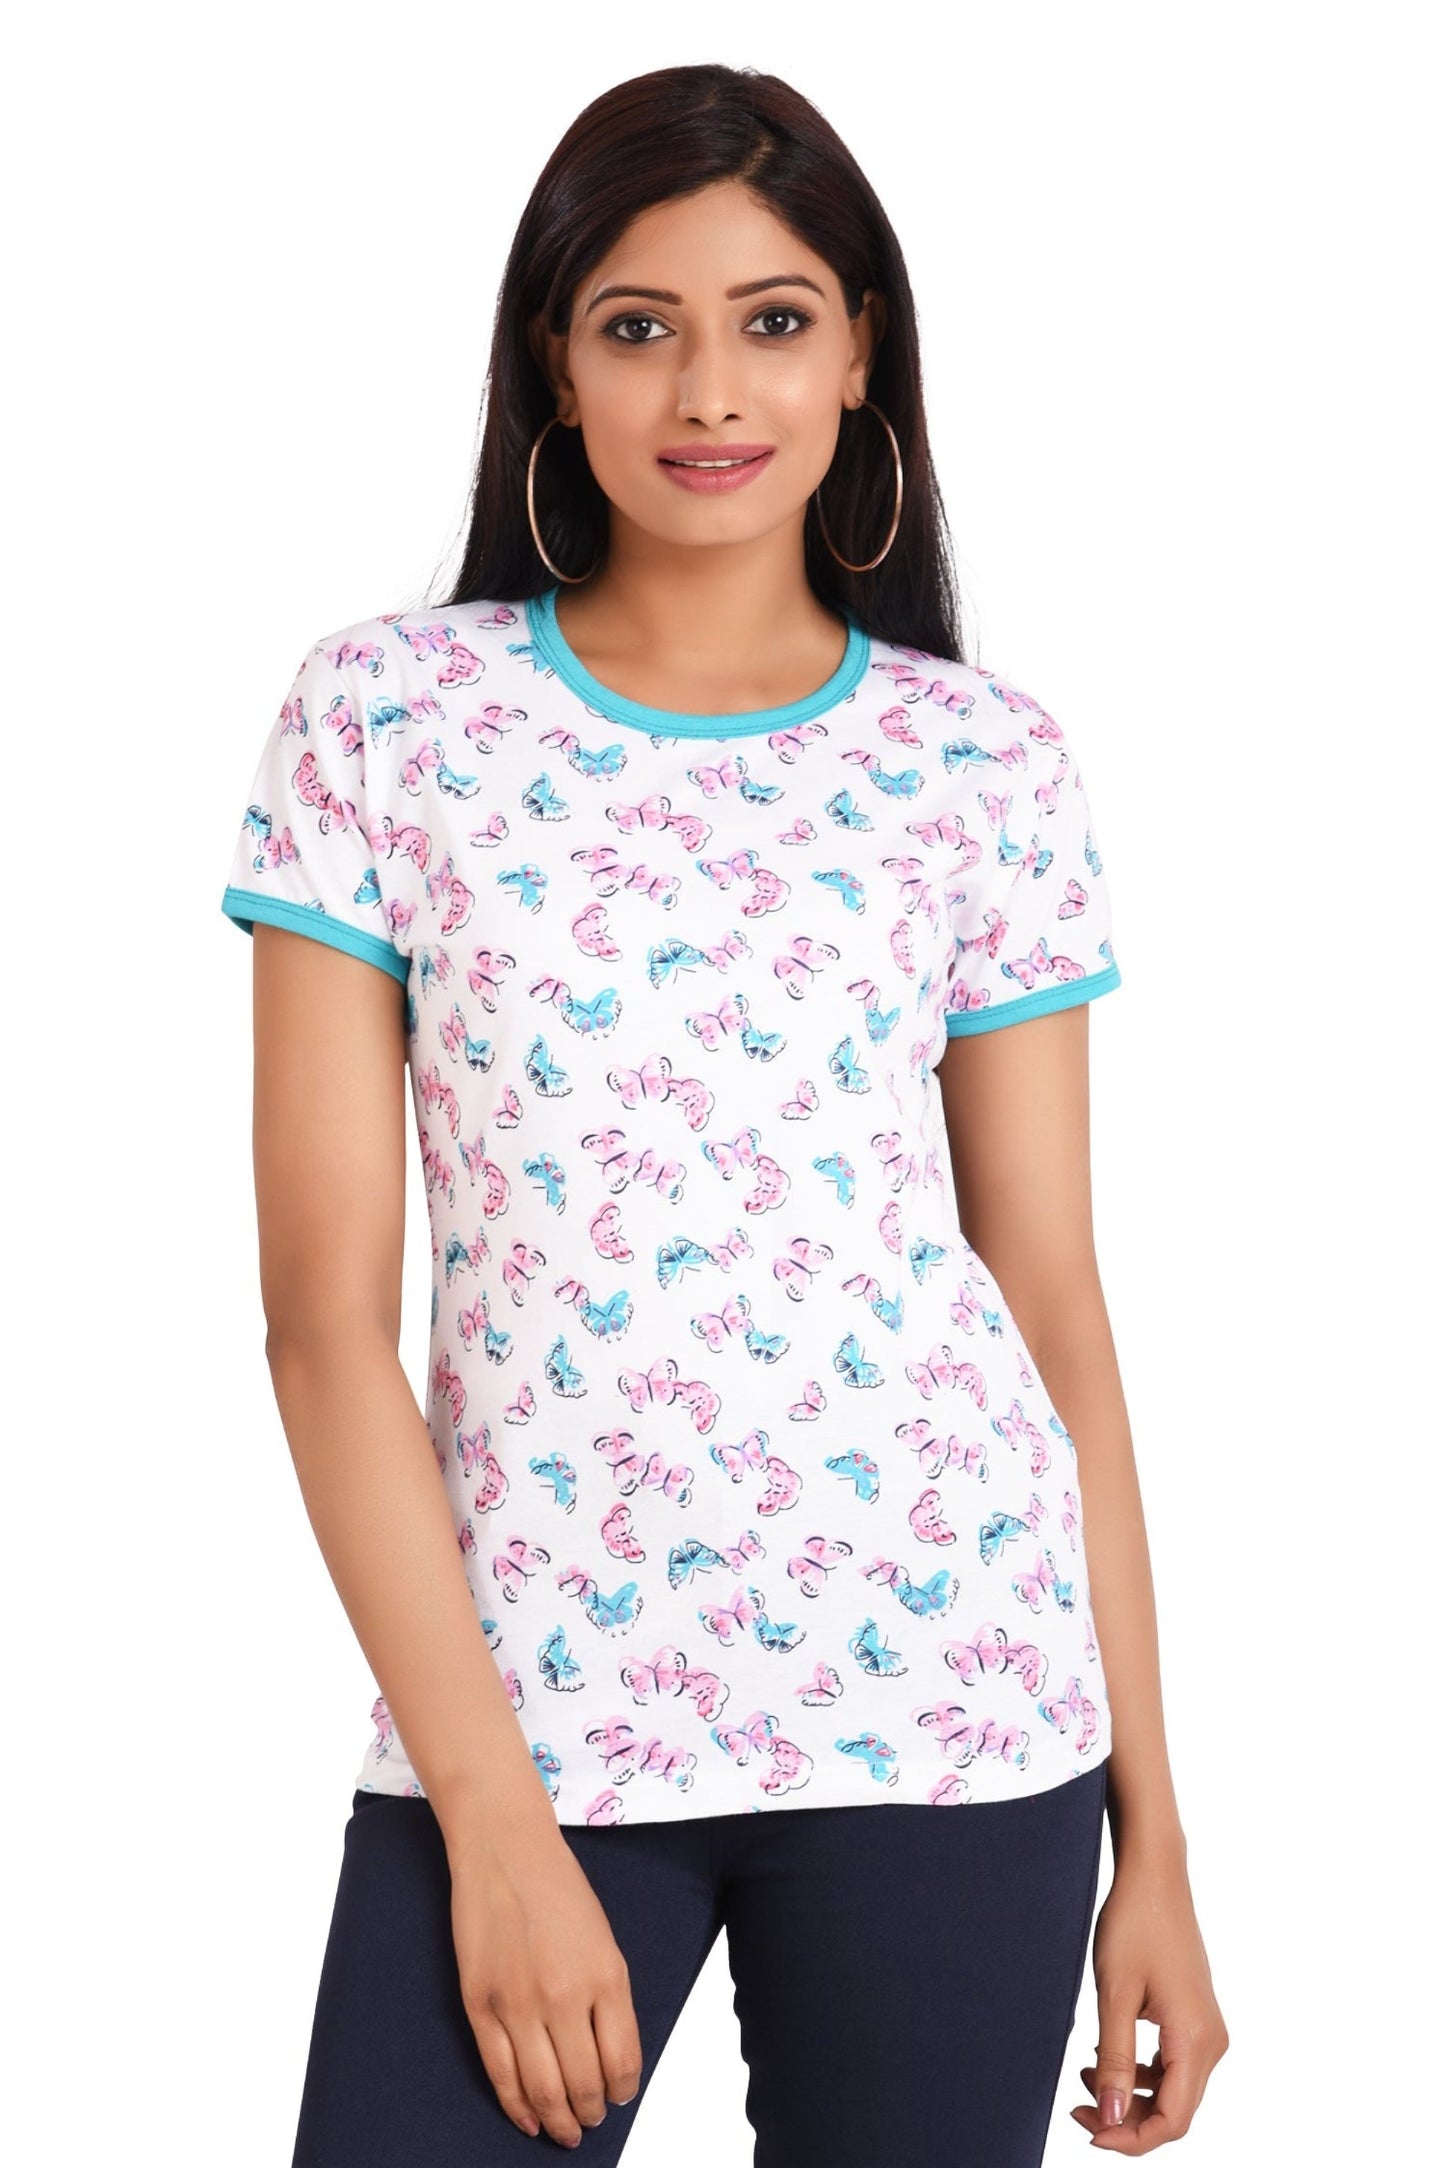 Women's Cotton Round Neck PLUS size T-shirt - BUTTERFLY , front view